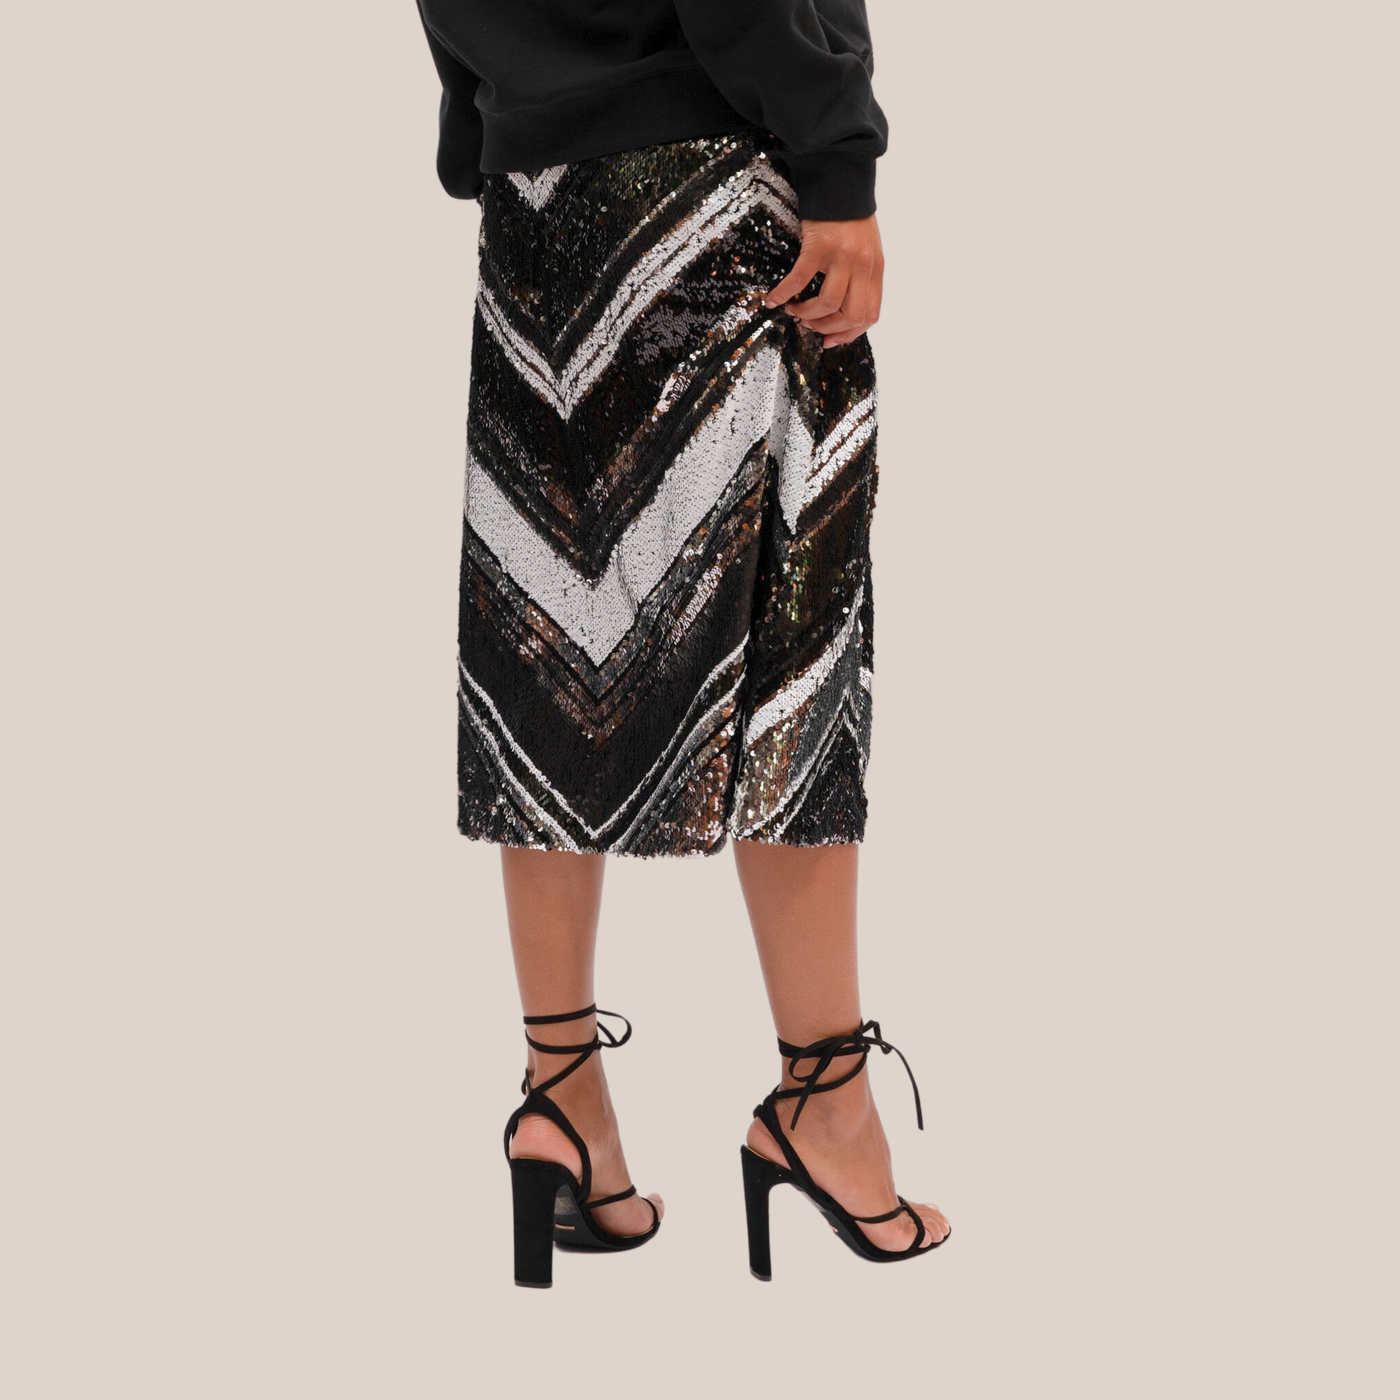 Gotstyle Fashion - We Are The Others Skirts Chevron Bands Sequin Midi Skirt - Silver